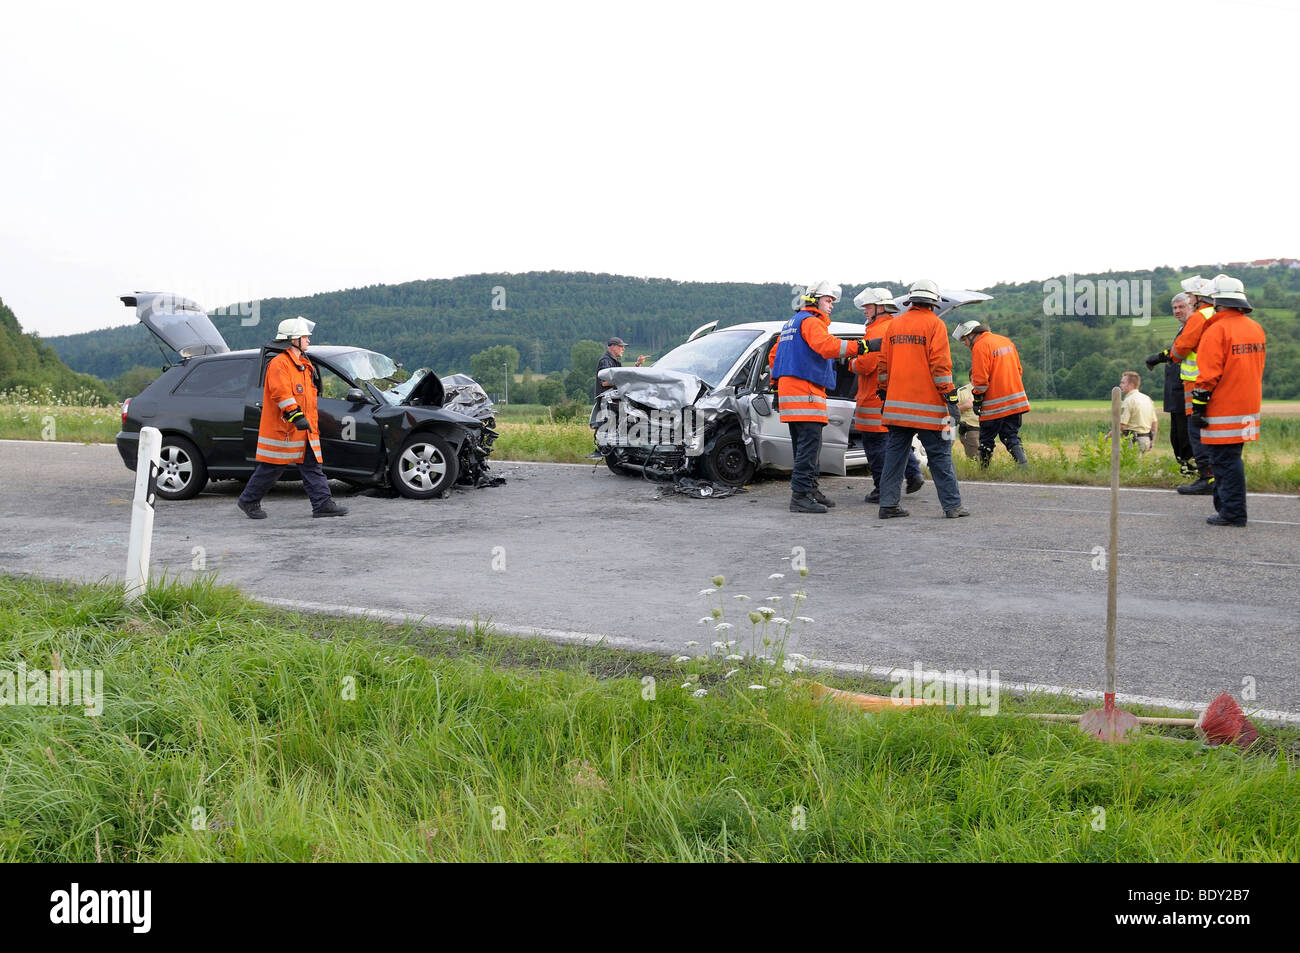 Couple was killed in traffic accident, head-on collision on the L 1184 road between Miedelsbach and Rudersberg, Baden-Wuerttemb Stock Photo